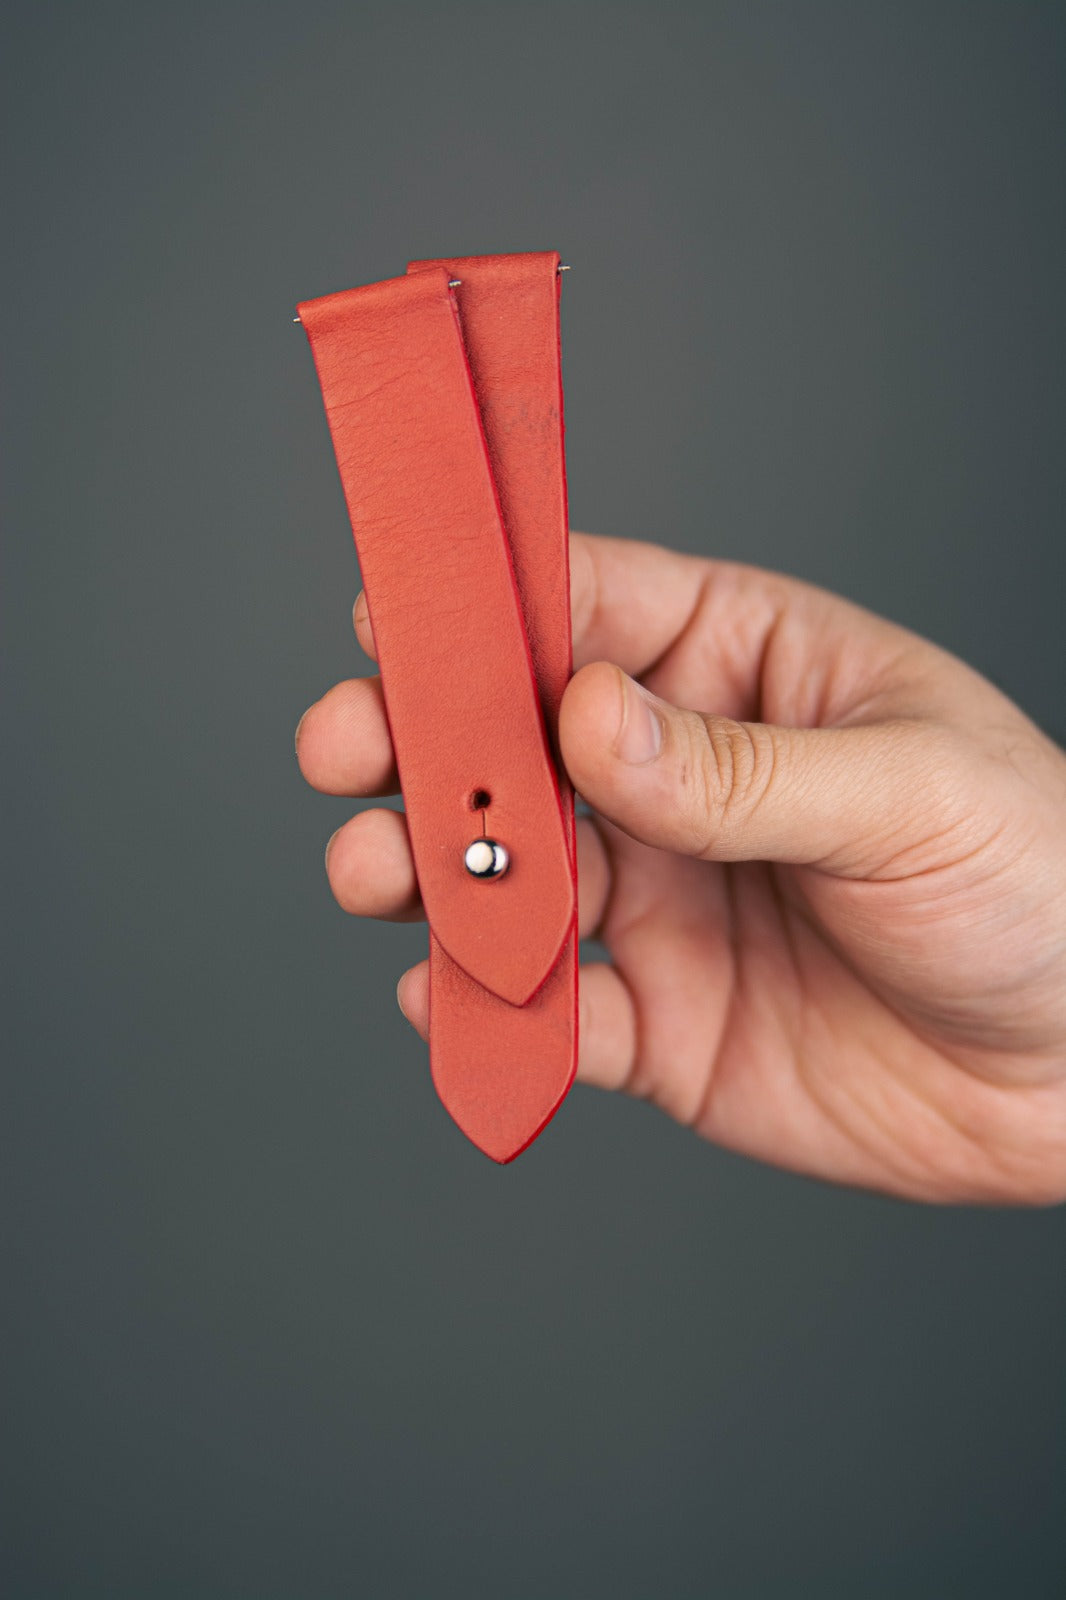 Salmon Red Leather Watch Strap - Quick Release Pins - The Hermoso